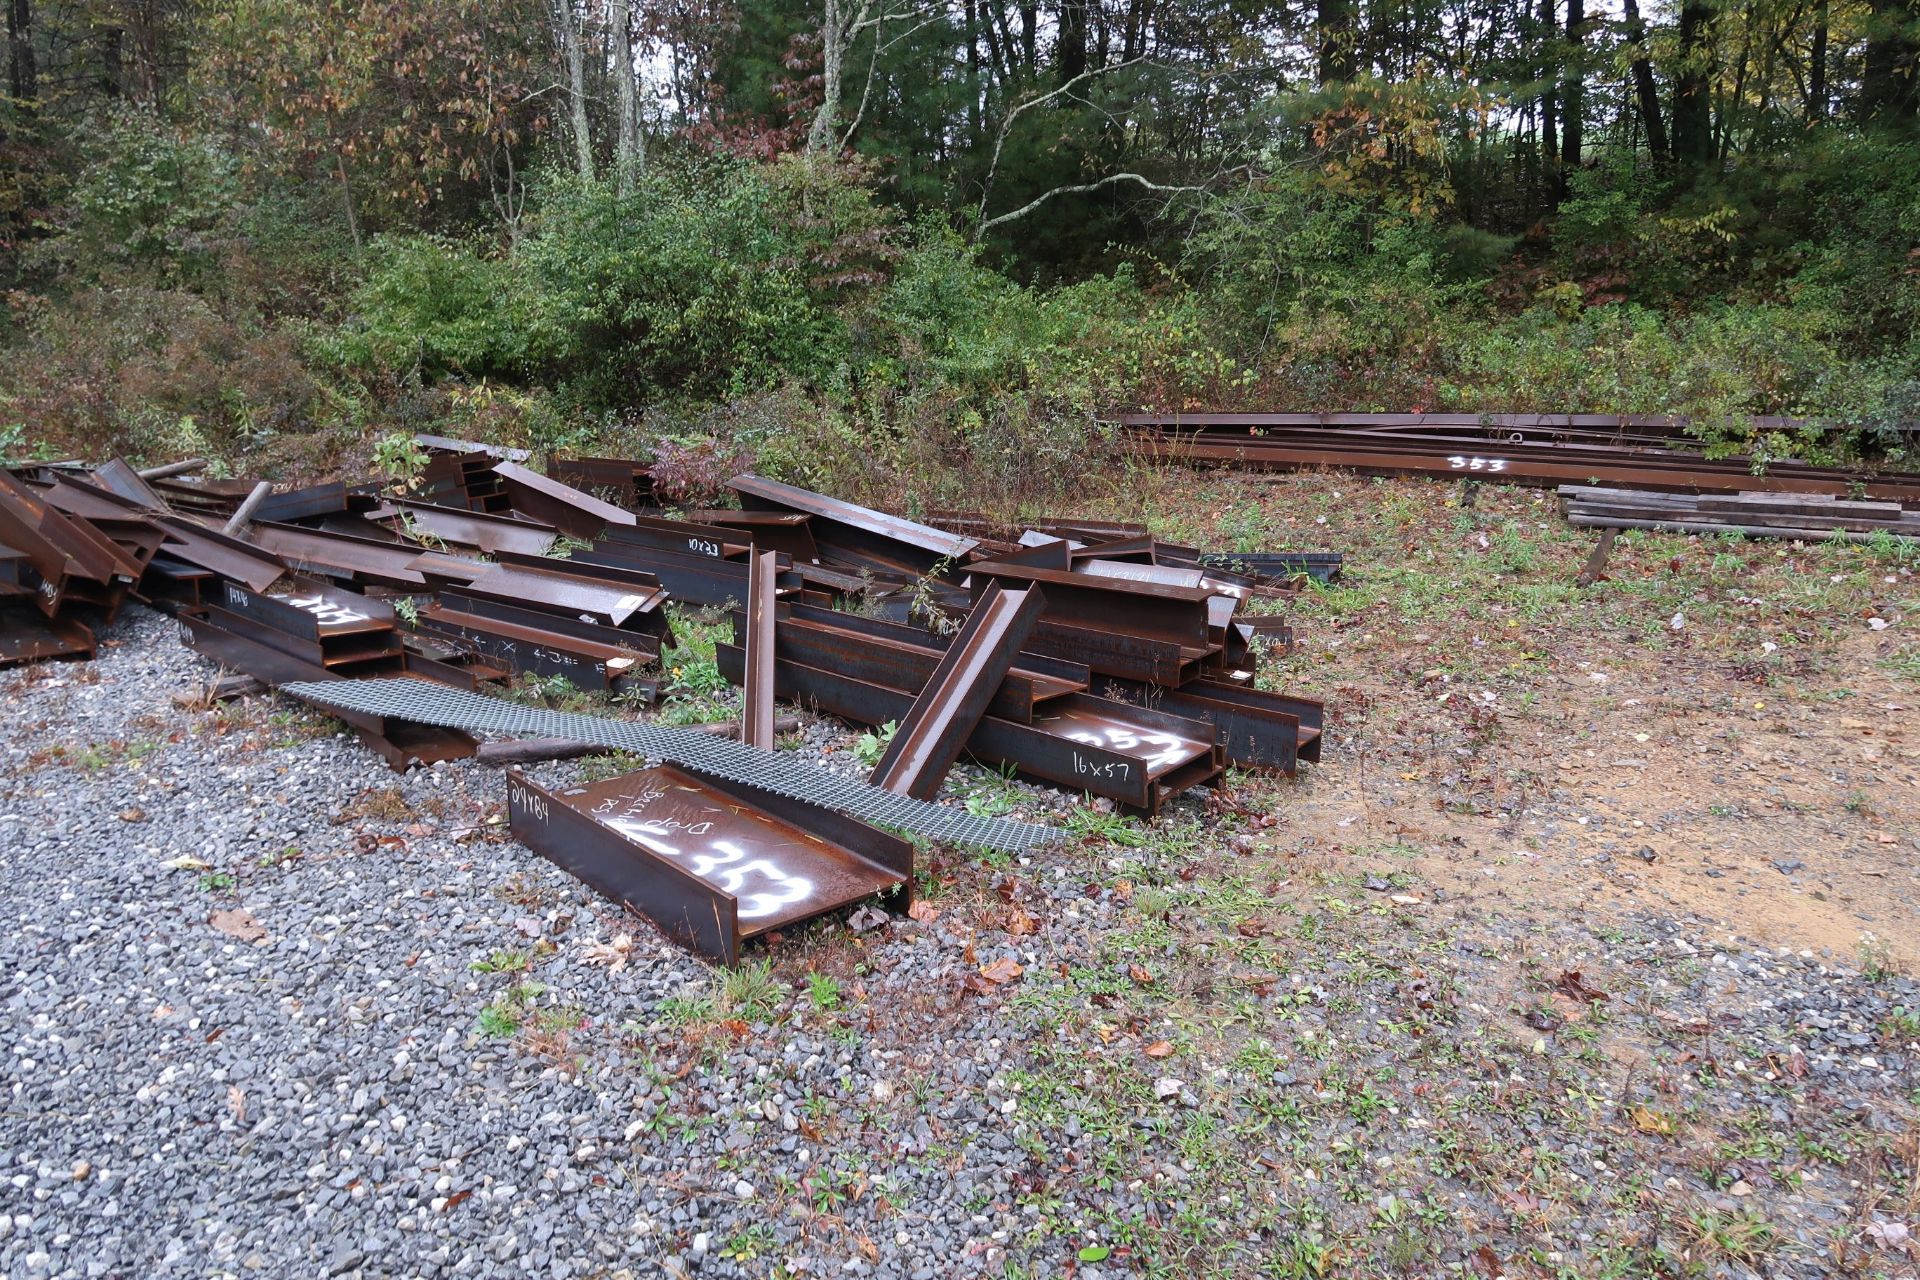 (LOT) LARGE QUANTITY OF ASSORTED STEEL STRUCTURAL ON GROUND AT OUTER PERIMETER OF DRIVE WAY - SEE